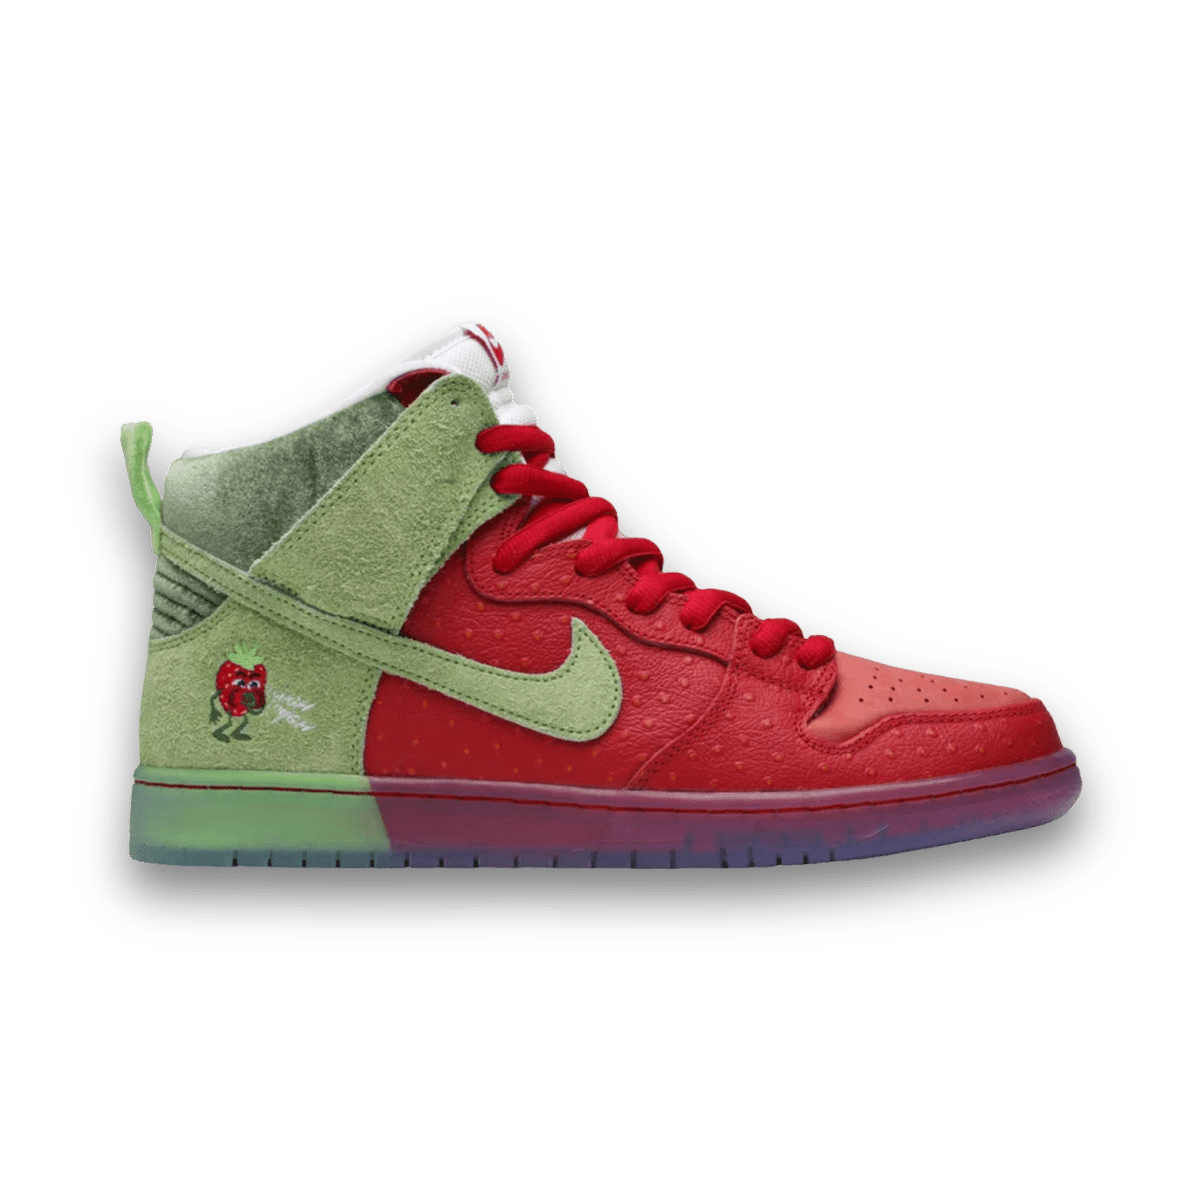 Dunk High SB 'Strawberry Cough' - High Sneaker - Jawns on Fire Sneakers & Streetwear